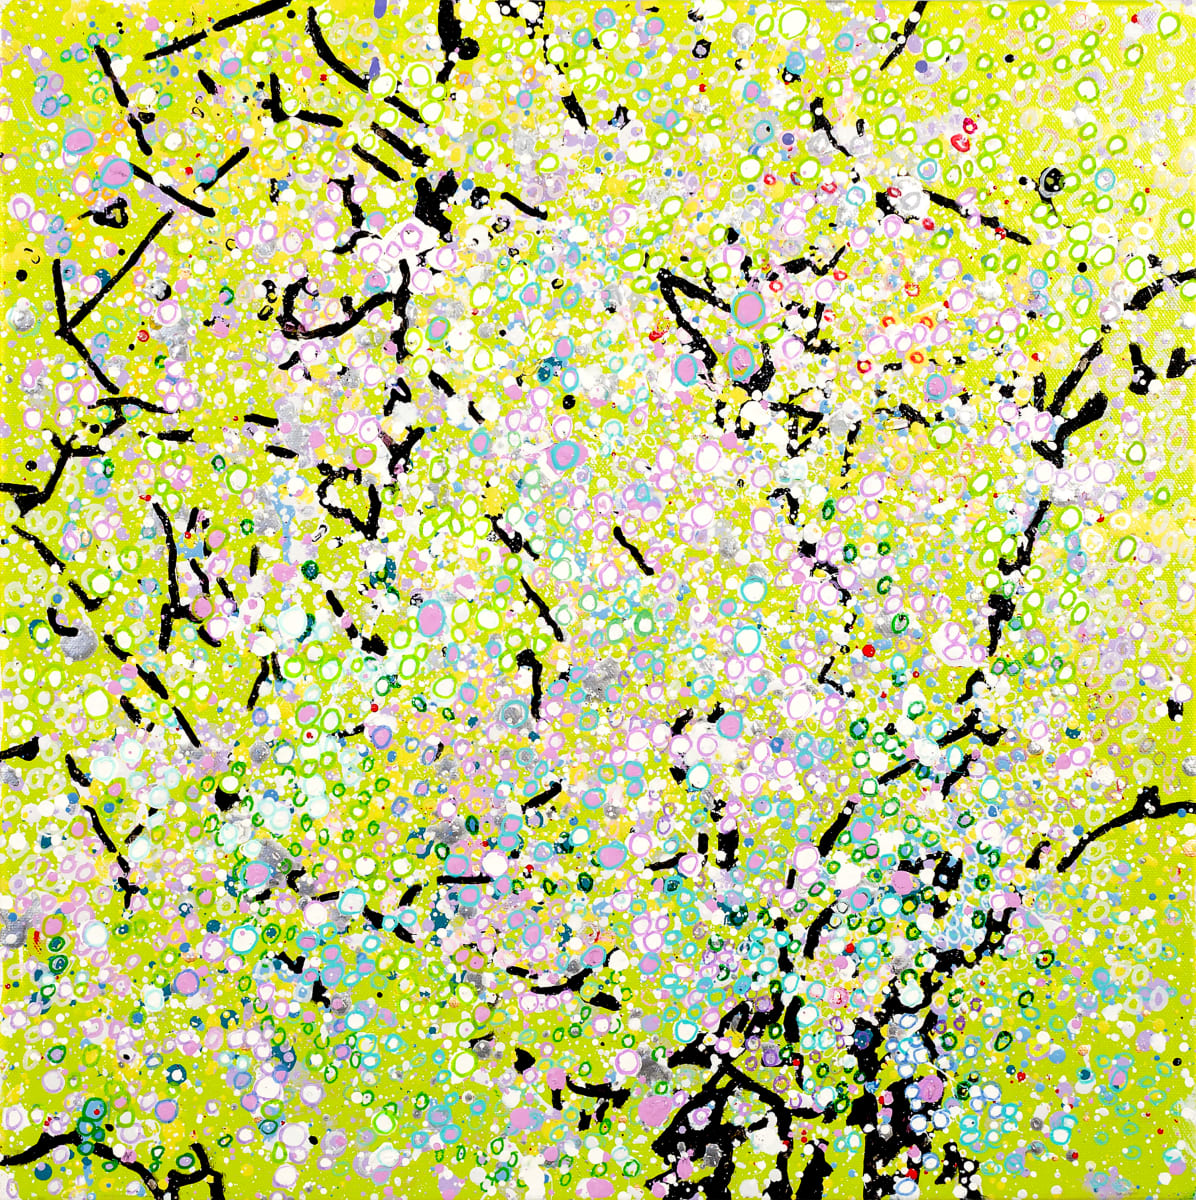 Almond Tree - Nice  Image: "Almond Tree - Nice", 18 inches x 18 inches, oil, metallic paint, and acrylic markers on canvas, © 2022 Leslie Parke